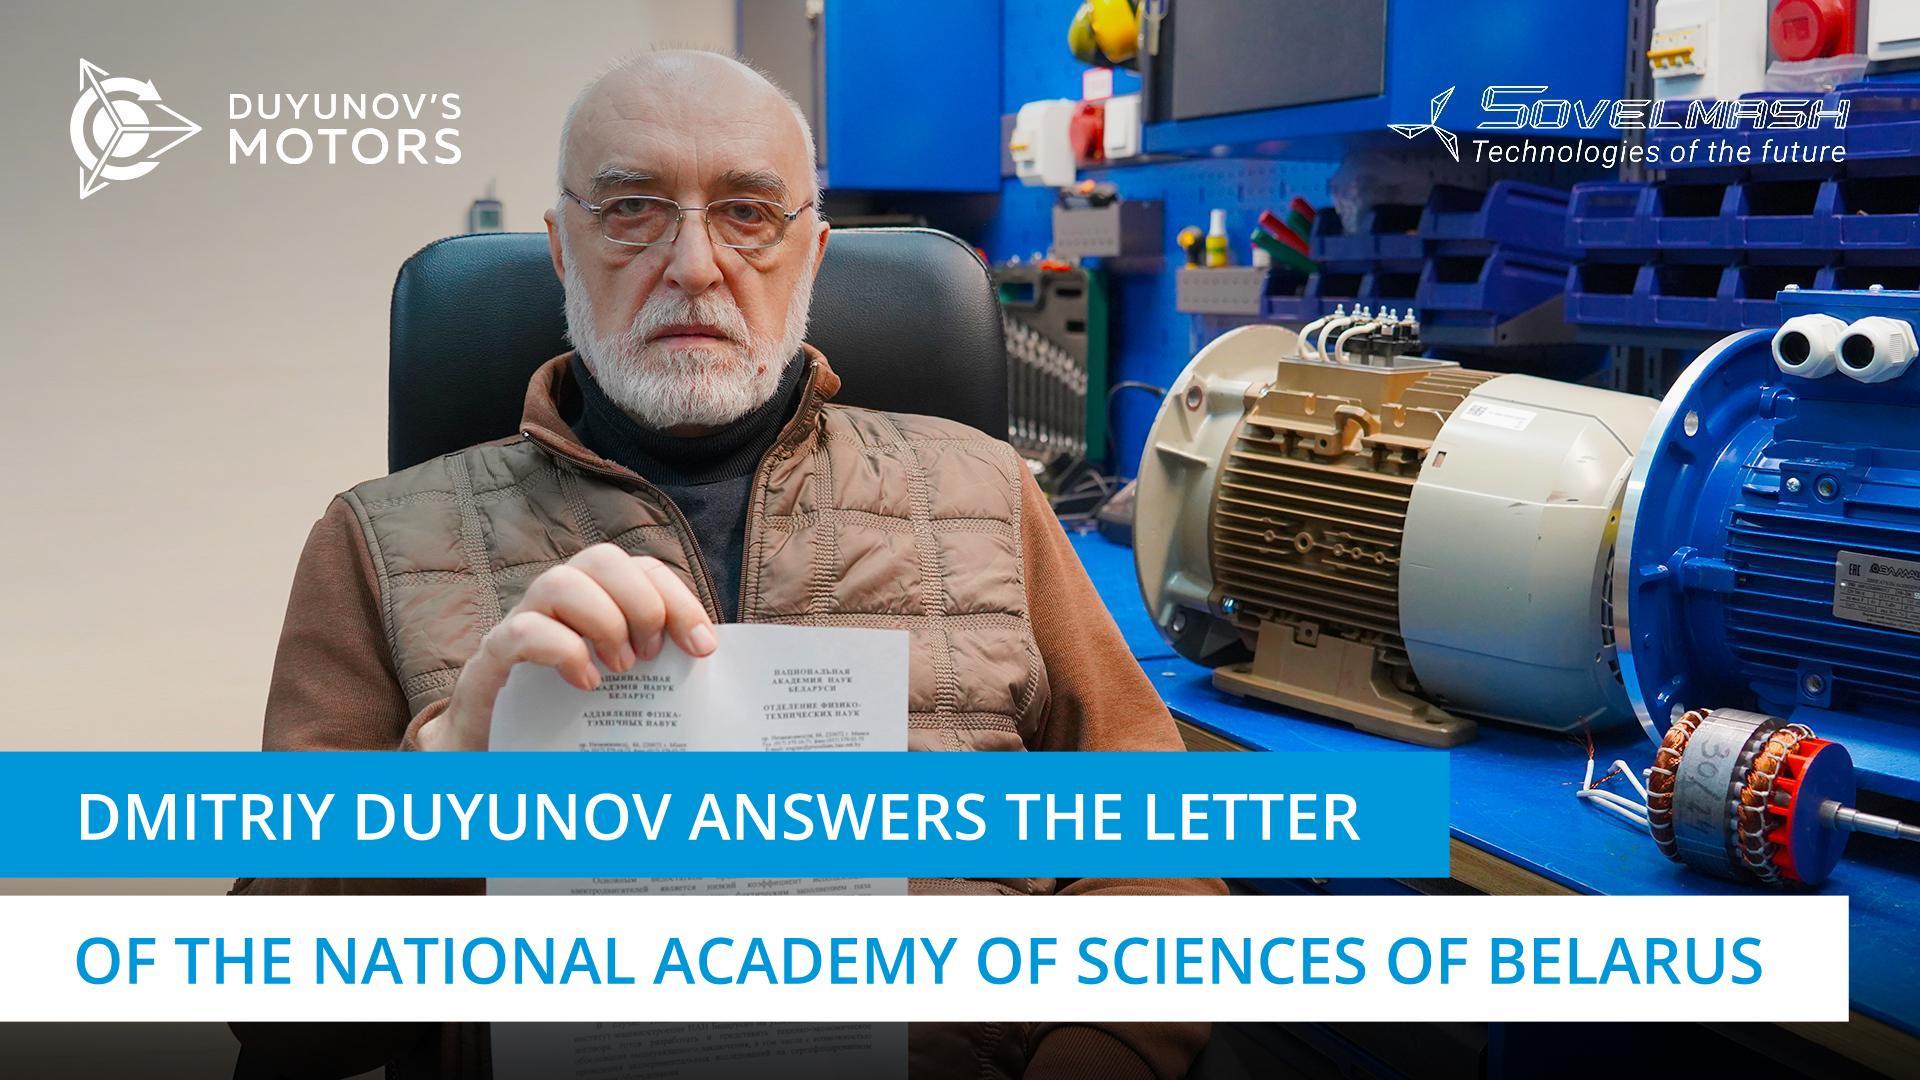 Dmitriy Duyunov responded to a letter from the National Academy of Sciences of Belarus